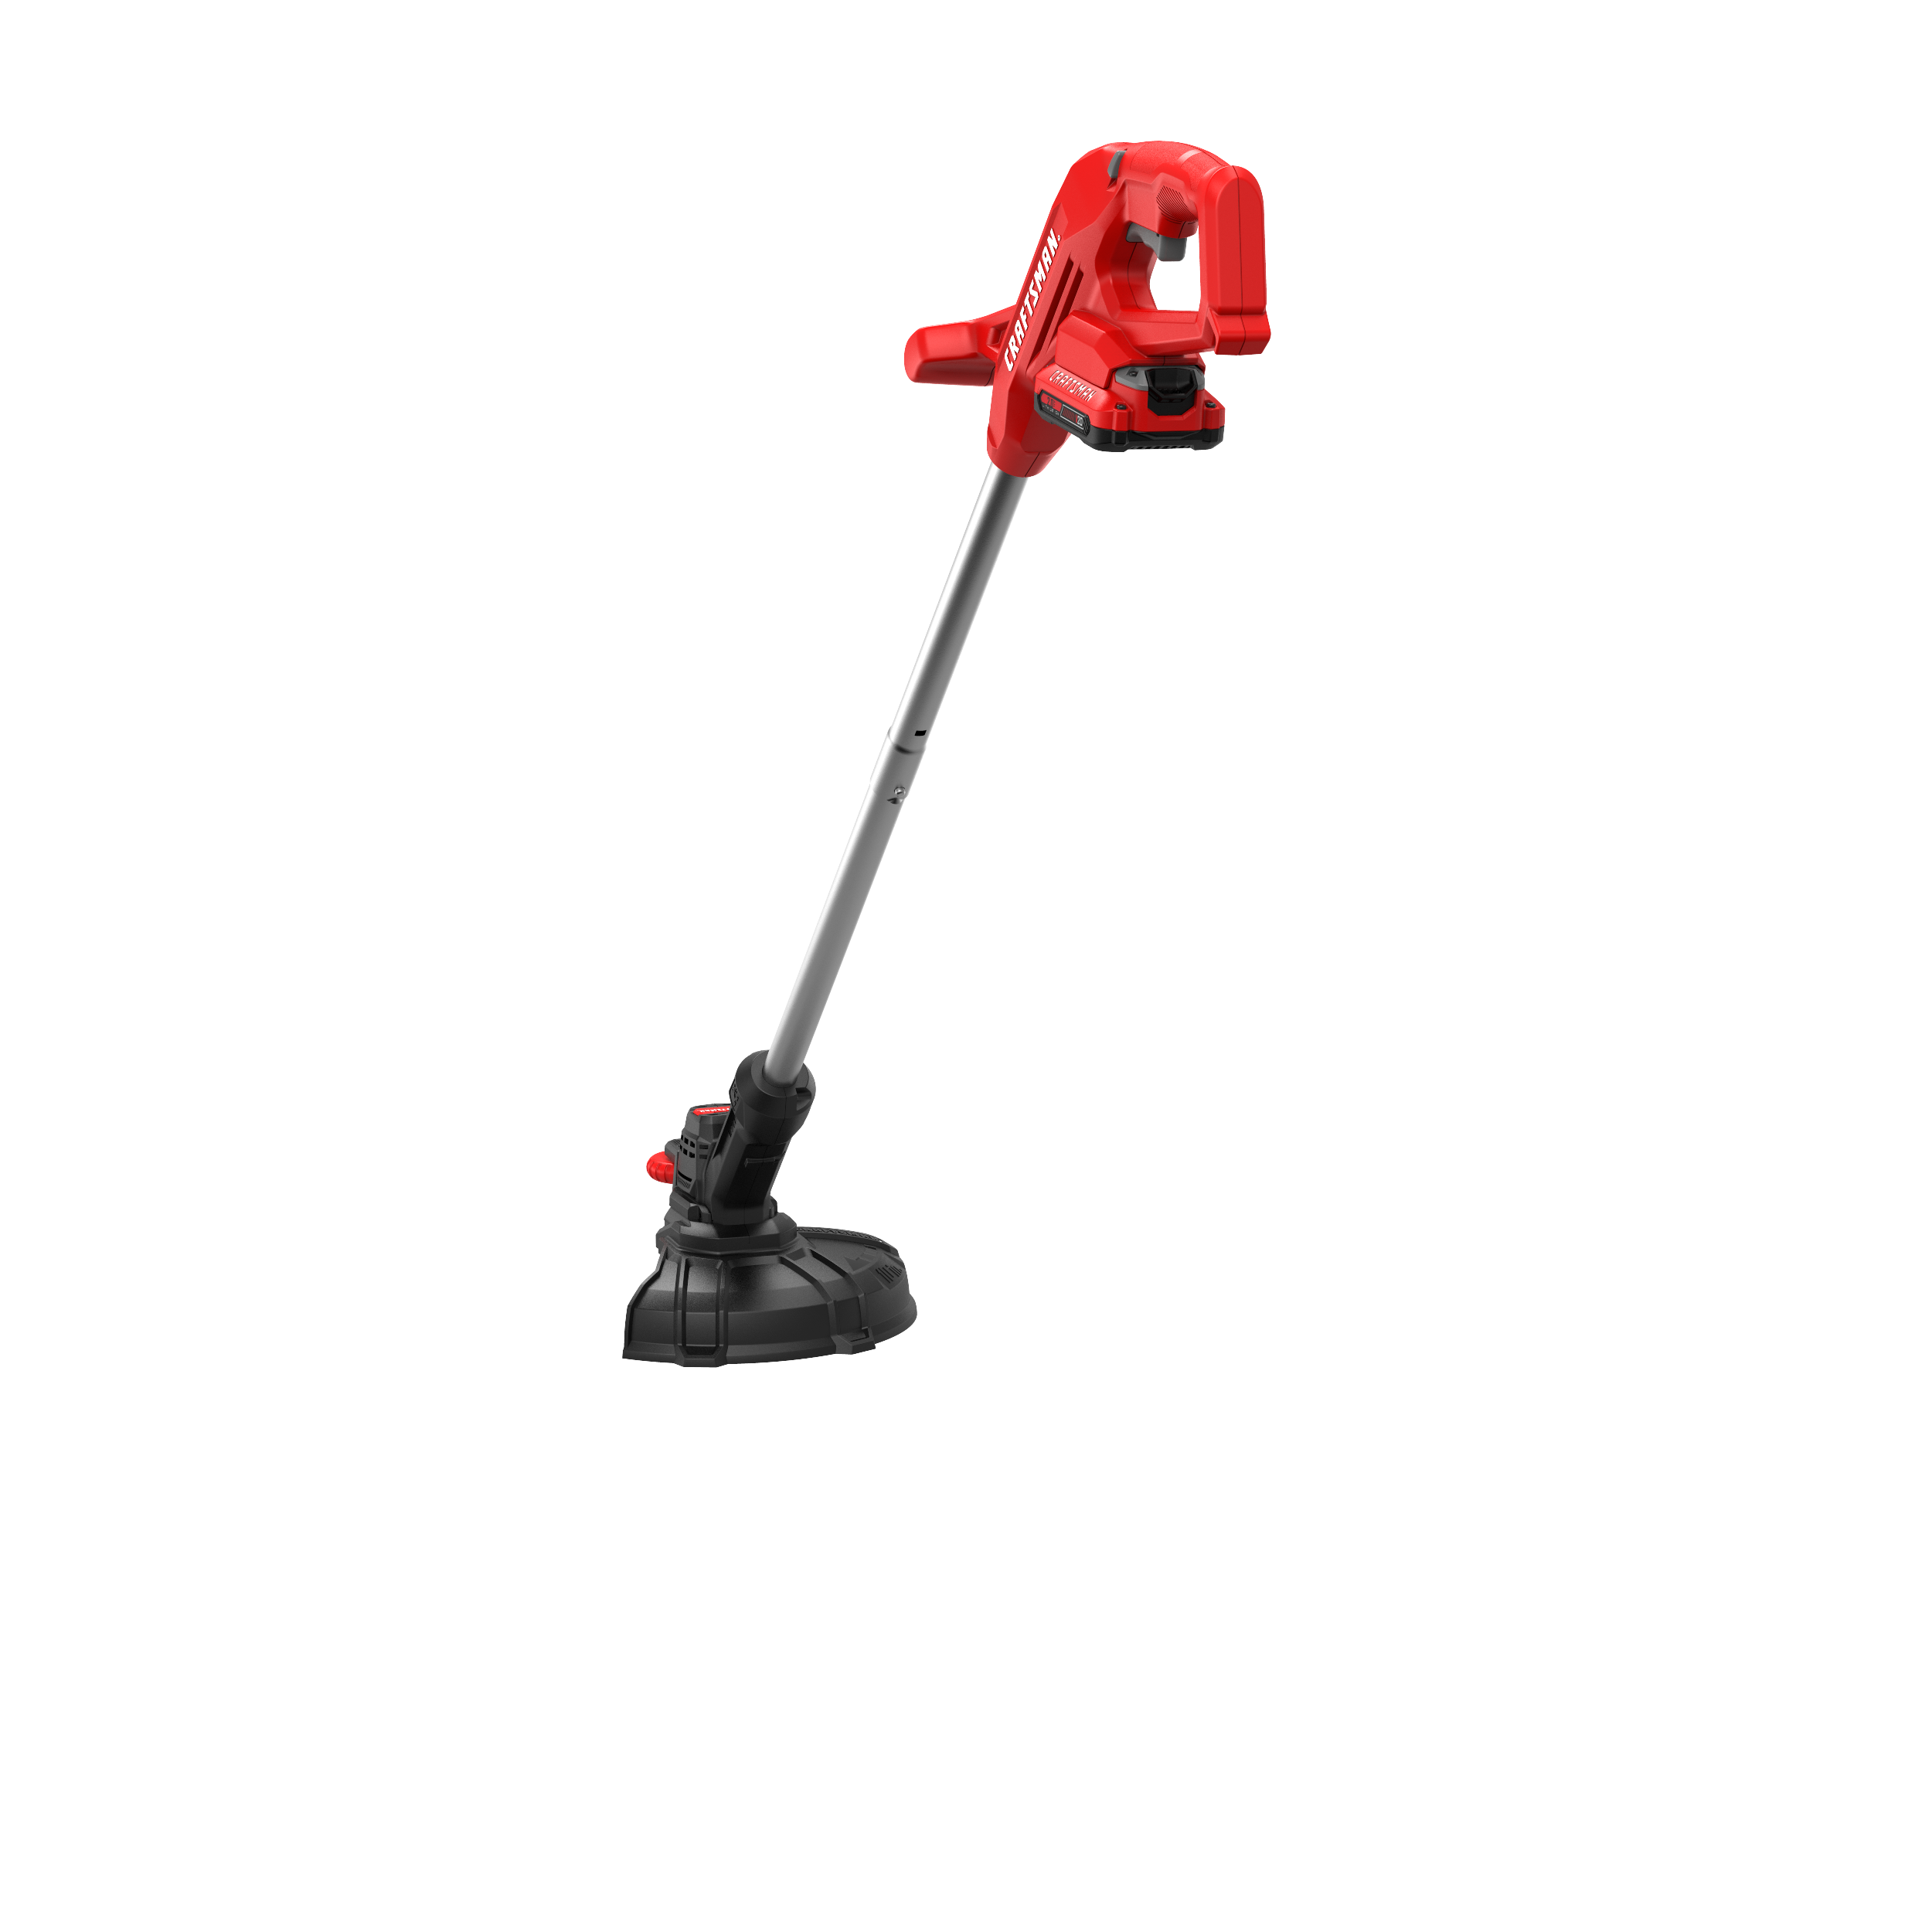  CRAFTSMAN CMCST900D1 V20* Cordless WEEDWACKER® String Trimmer/Edger  - Automatic Line Advance Feed with CMZST0653 3 pack .065 inch string trimmer  spools : Everything Else